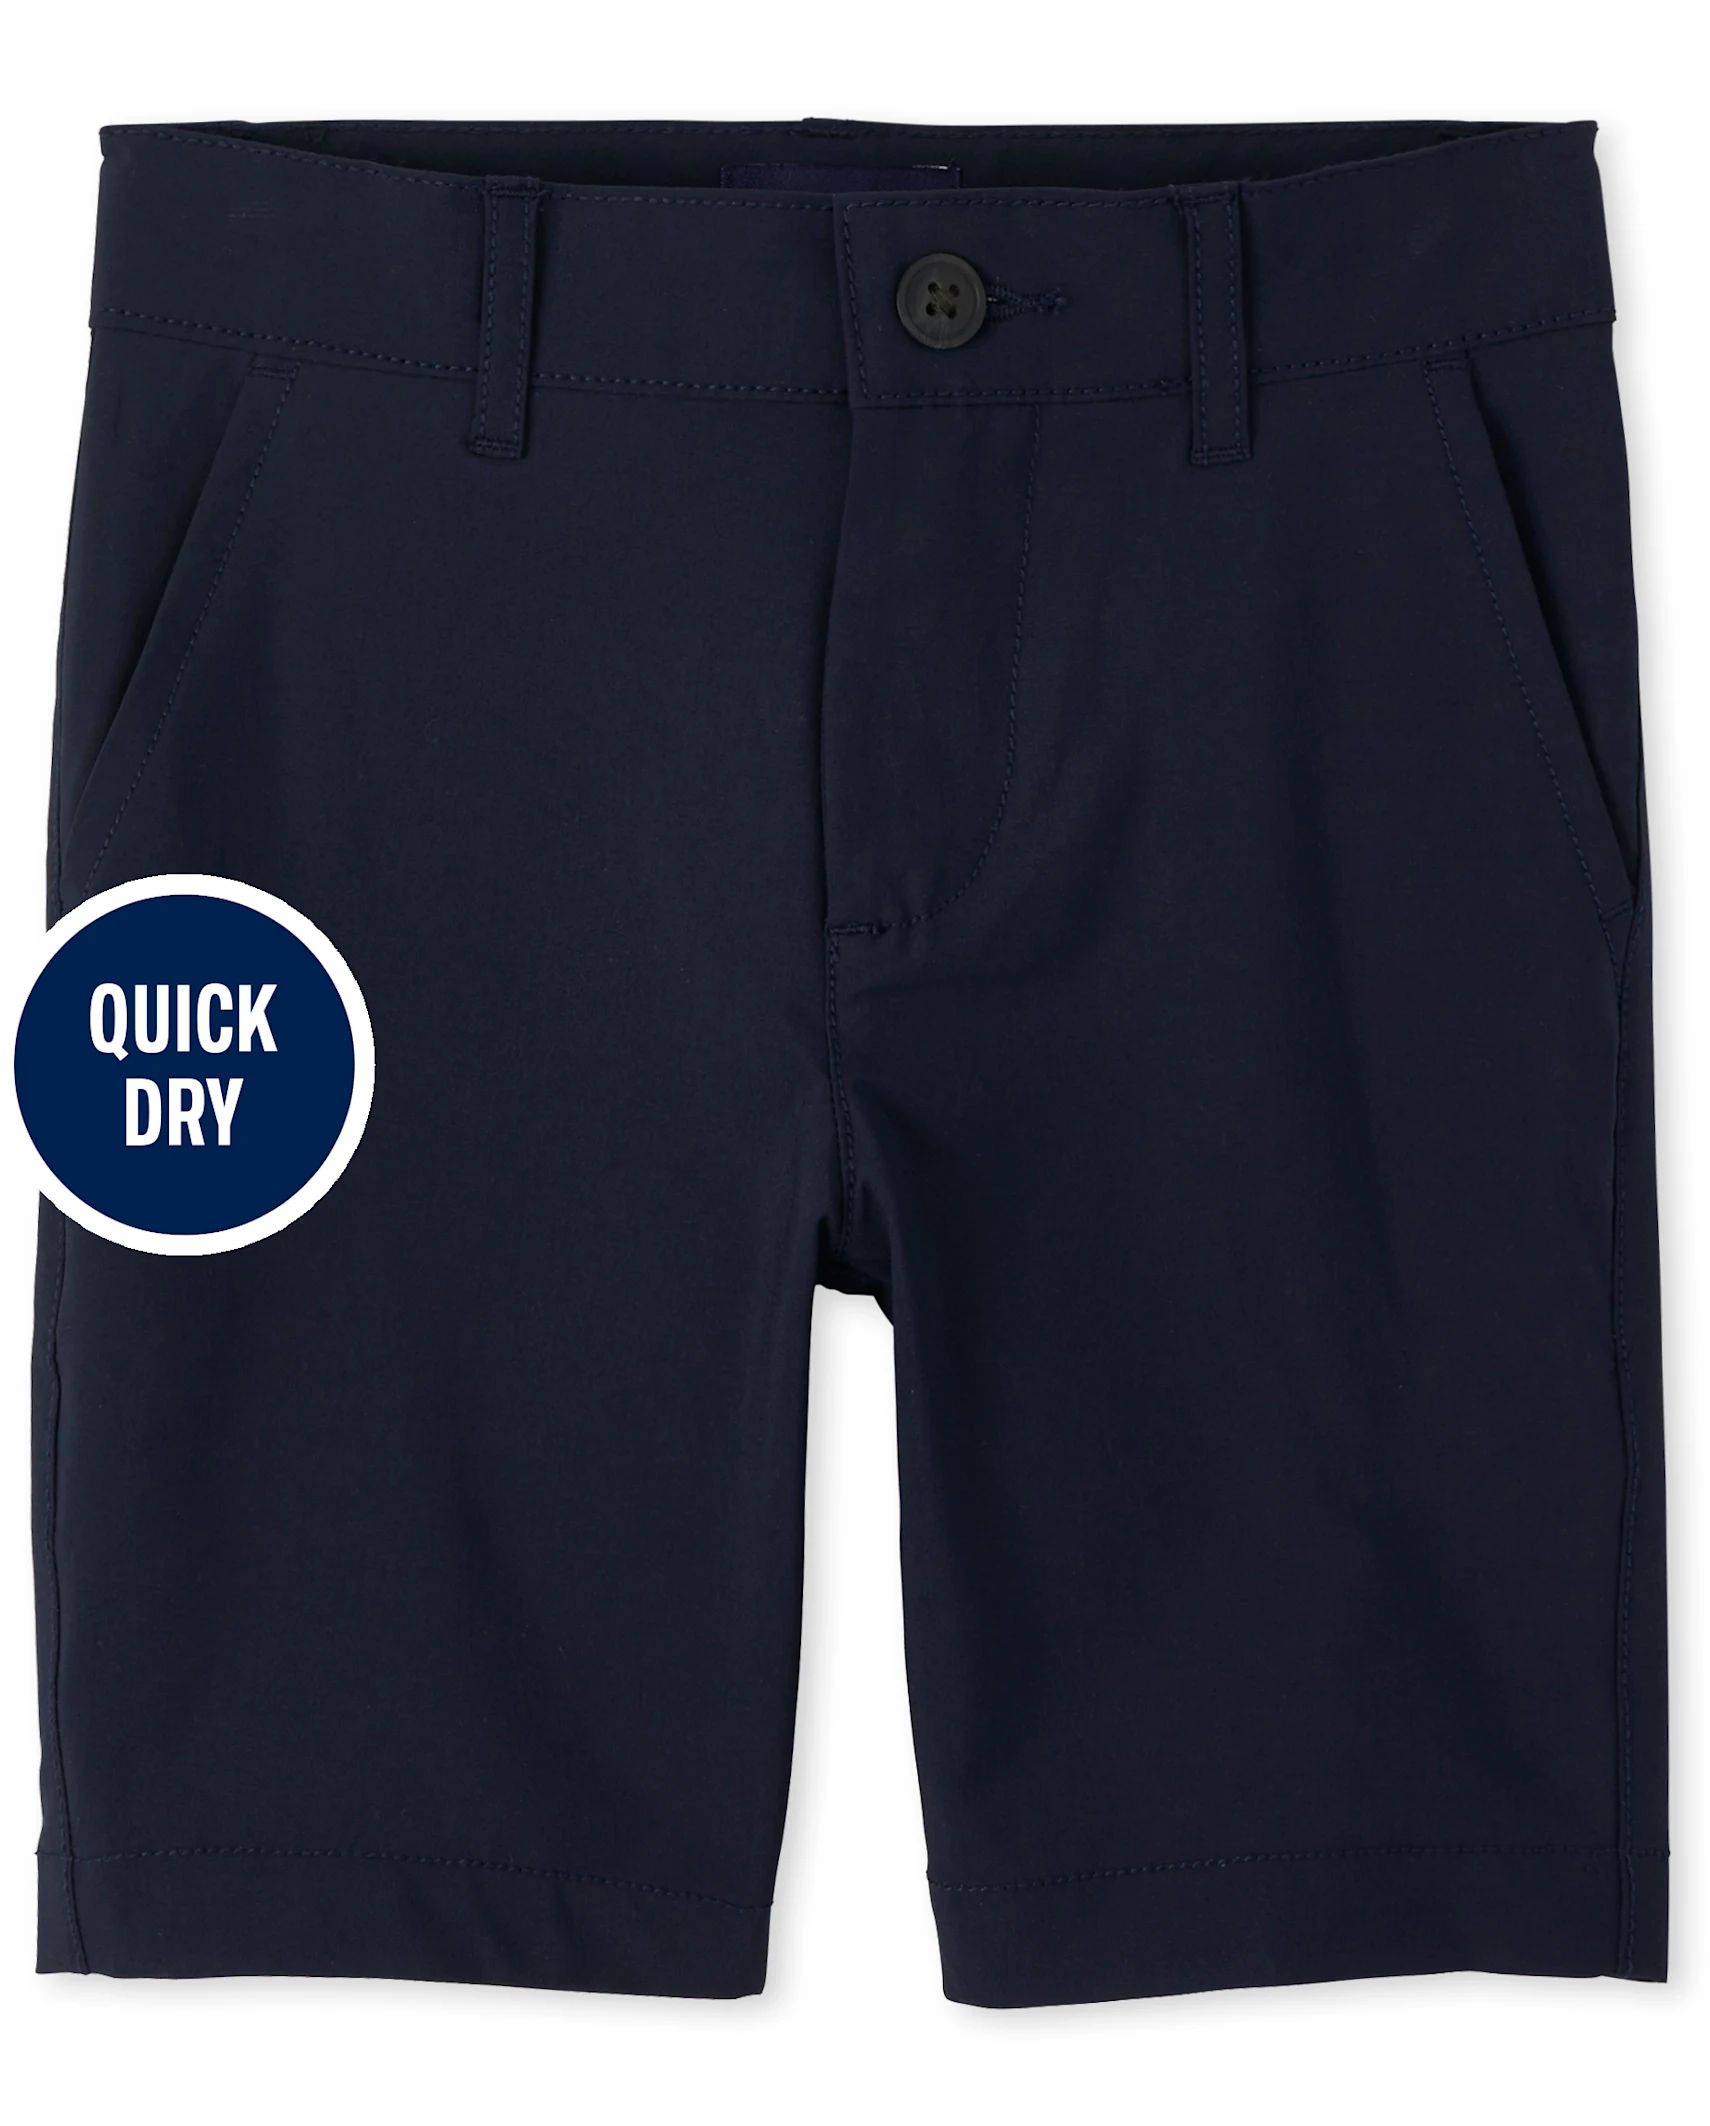 Boys Uniform Quick Dry Chino Shorts - new navy | The Children's Place